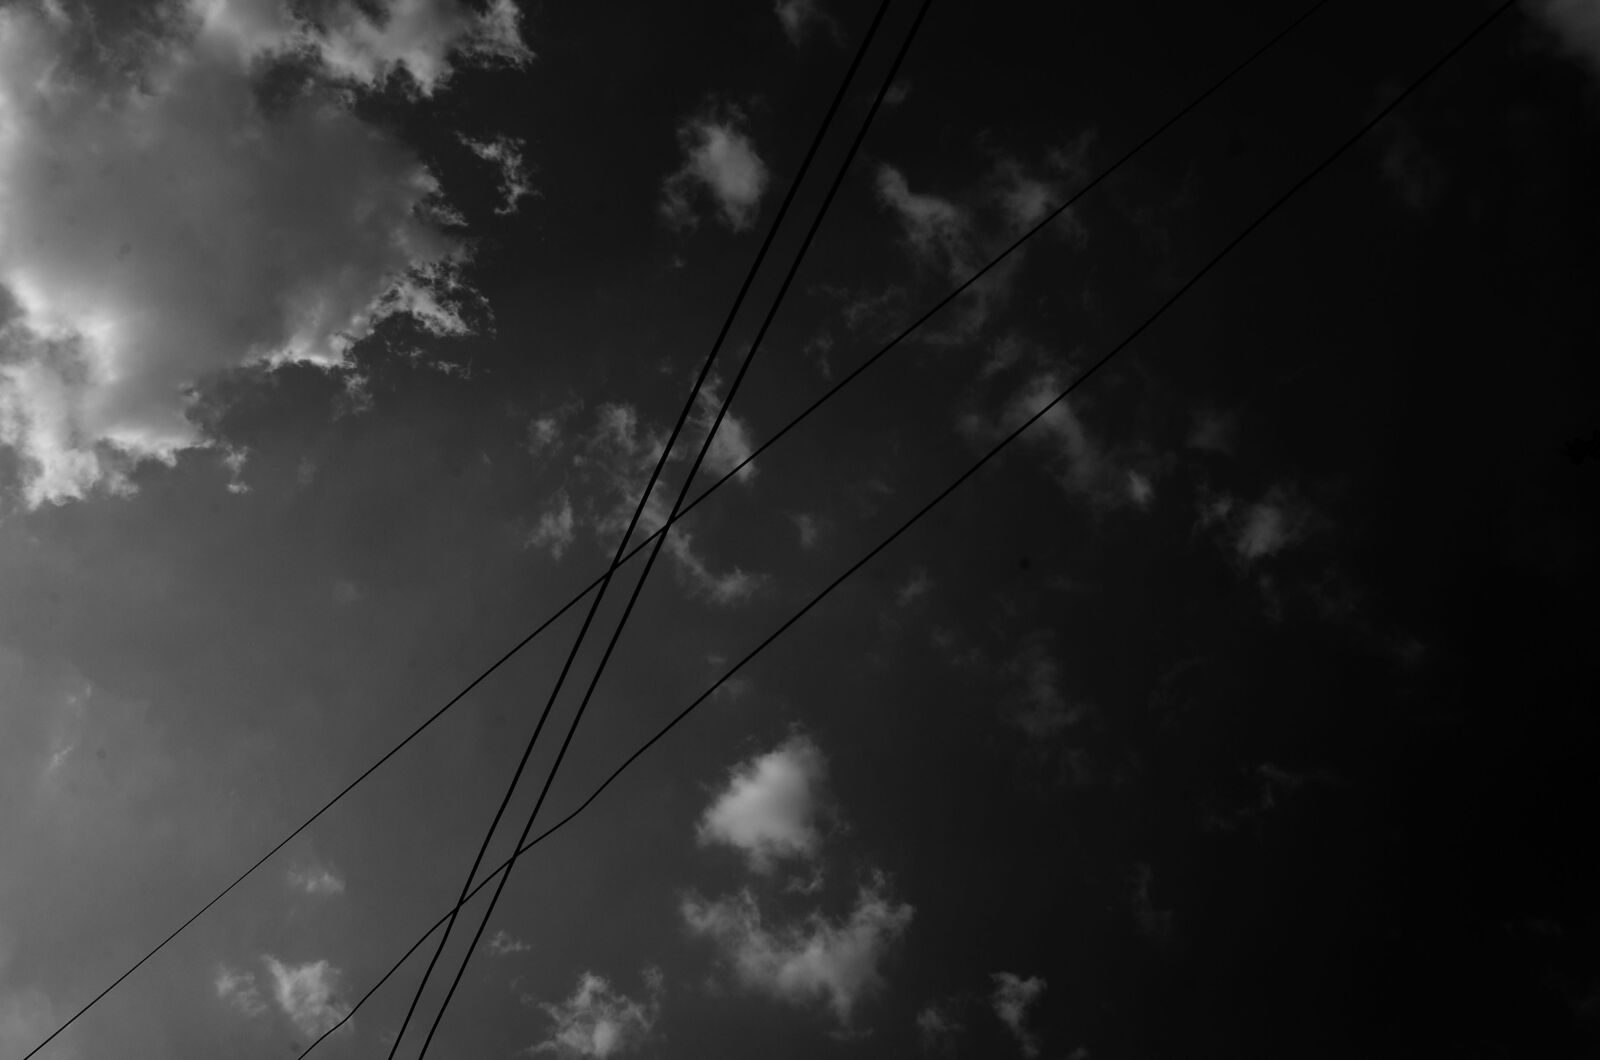 Nikon D7000 sample photo. Cables, sky, wire photography